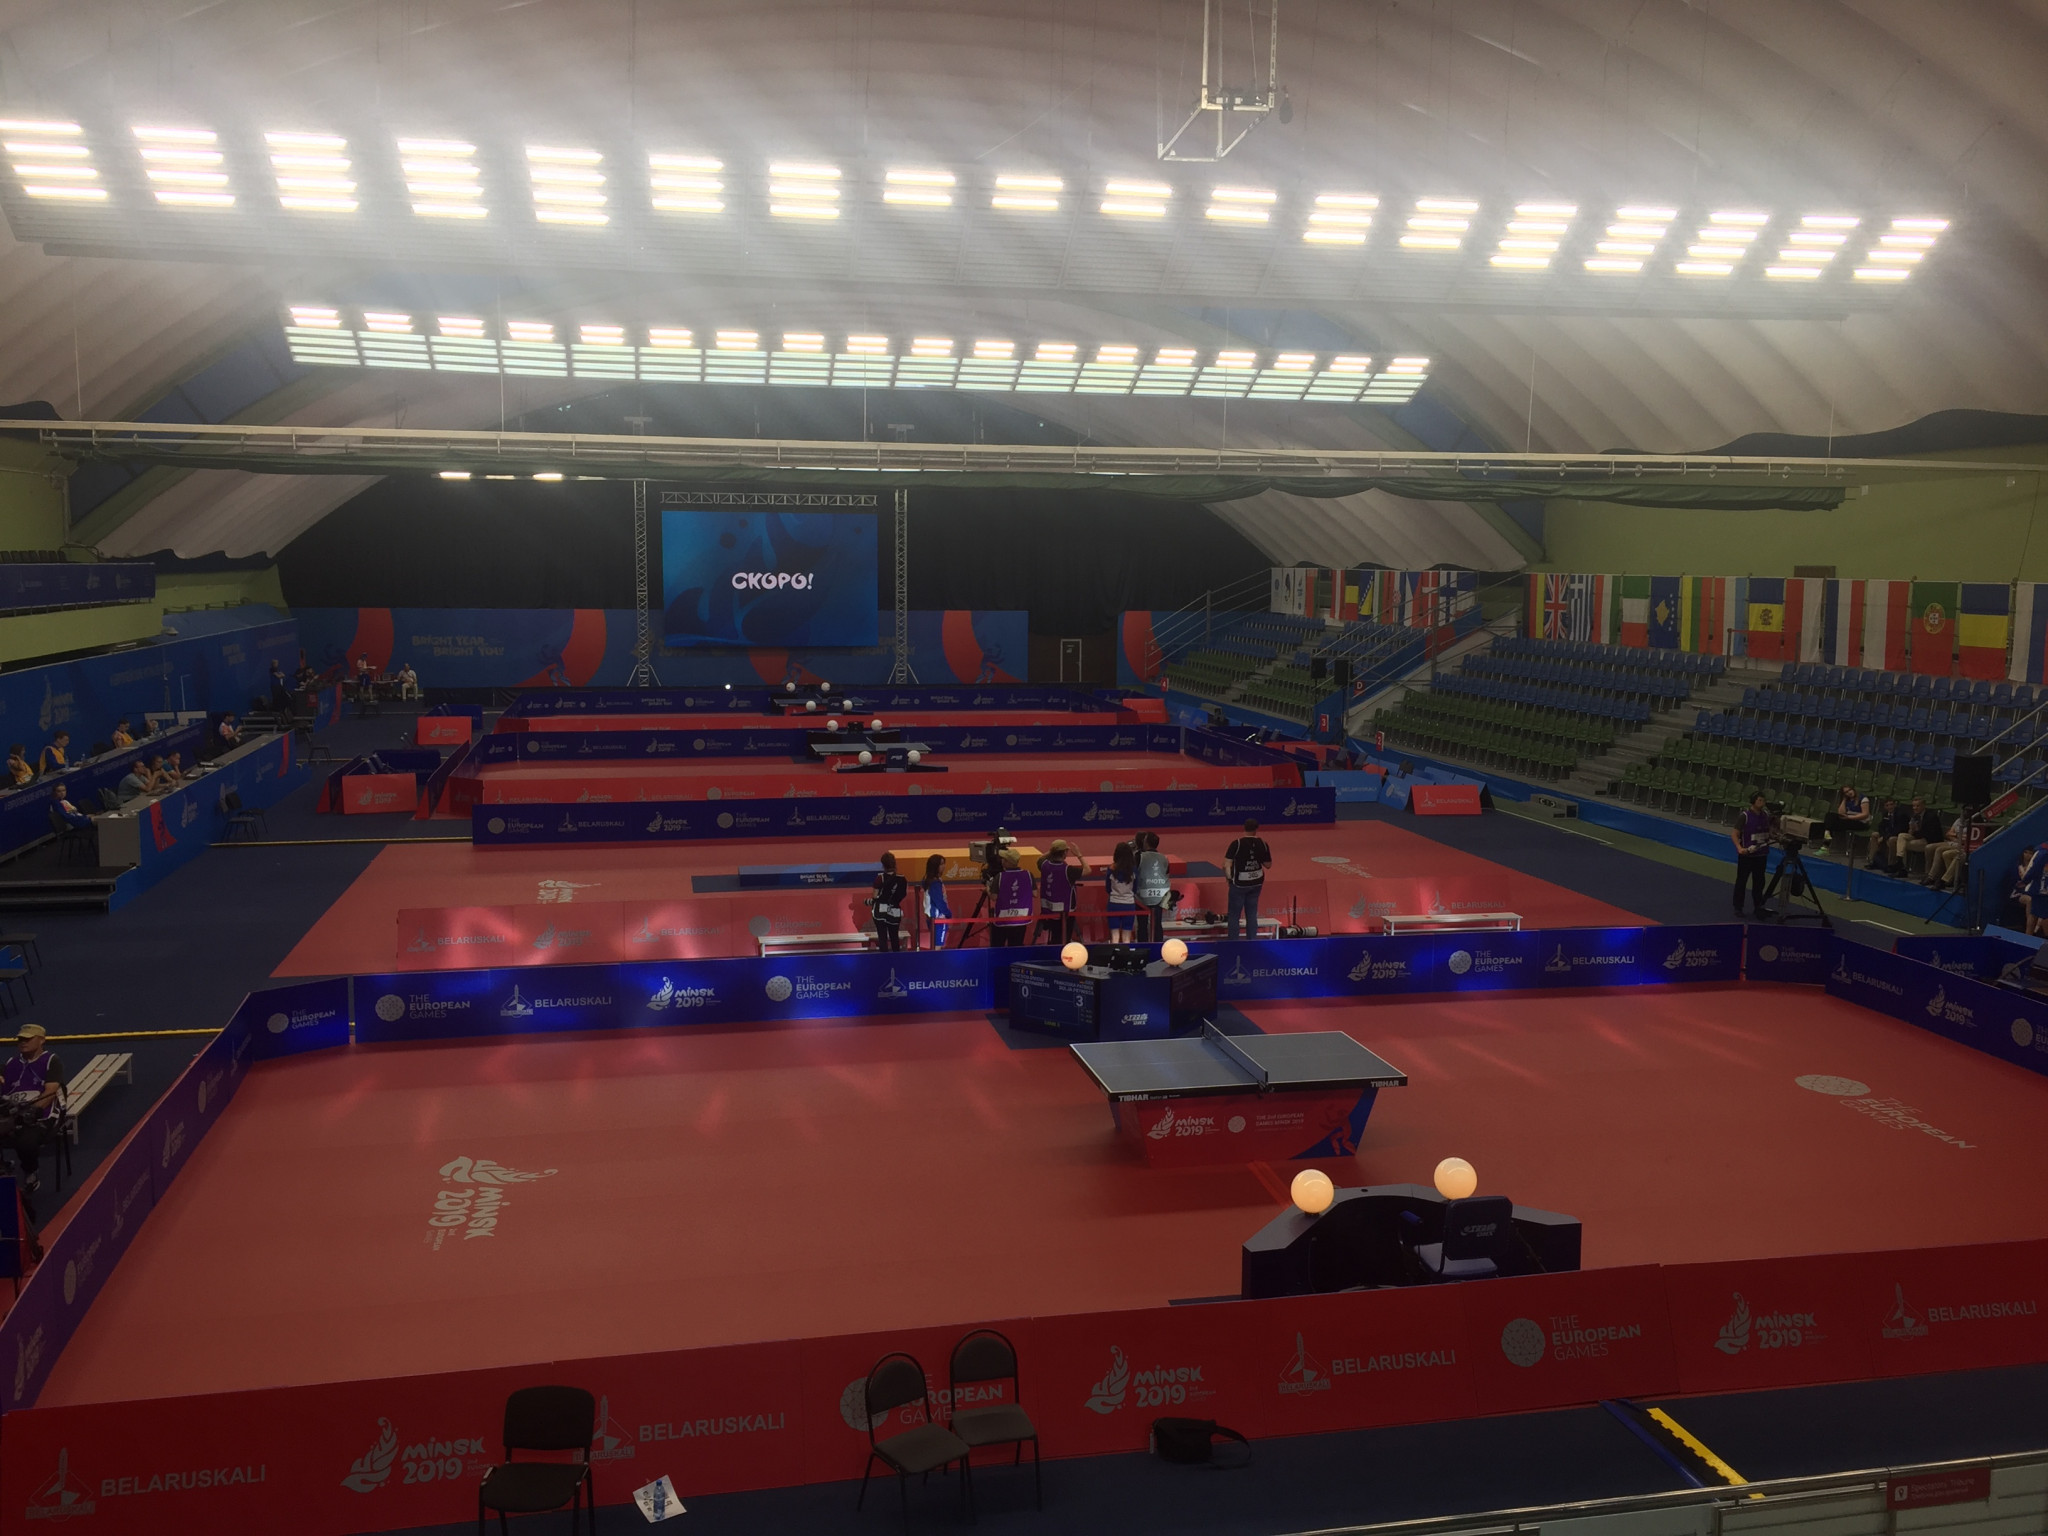 Medals were awarded in the table tennis mixed doubles at Tennis Olympic Centre ©ITG